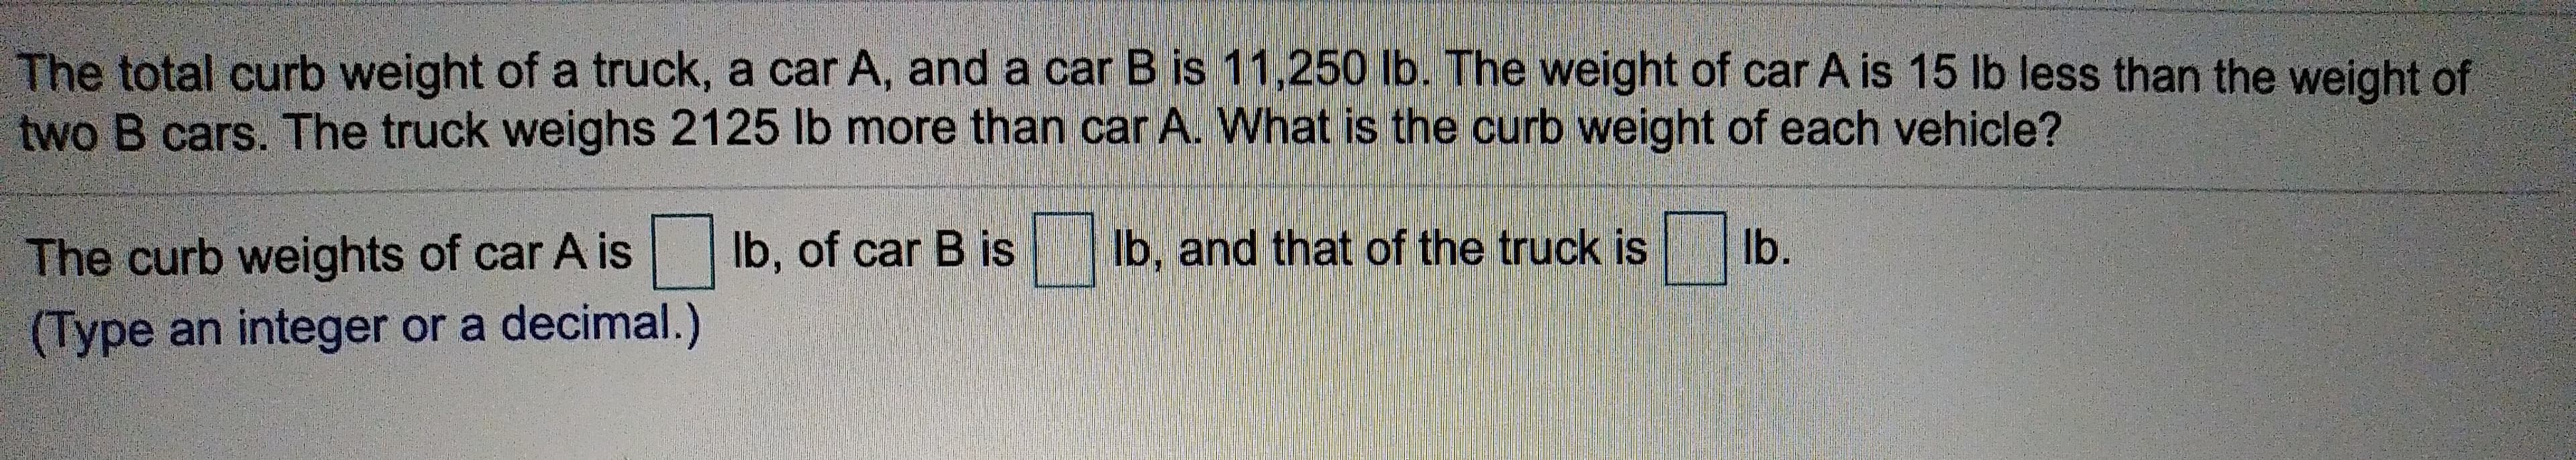 The total curb weight of a truck, a car A, and a car B is 11,250 lb. The weight of car A is 15 lb less than the weight of
two B cars. The truck weighs 2125 lb more than car A. What is the curb weight of each vehicle?
lb.
lb, and that of the truck is
lb, of car B is
The curb weights of car A is
(Type an integer or a decimal.)
